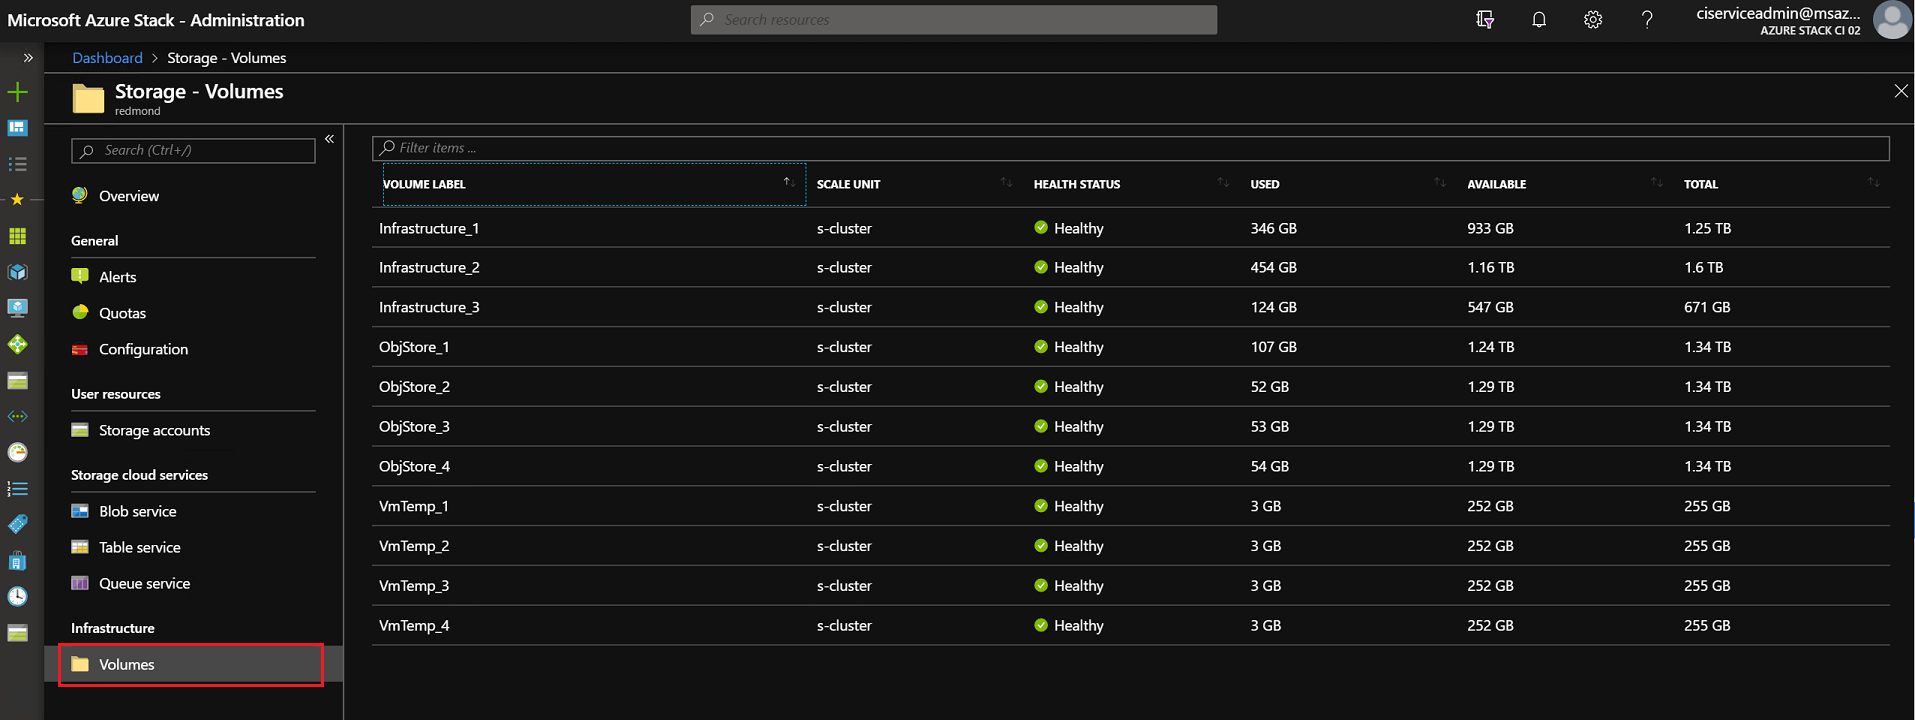 Image showing storage volumes from the Stack Hub administrator portal.